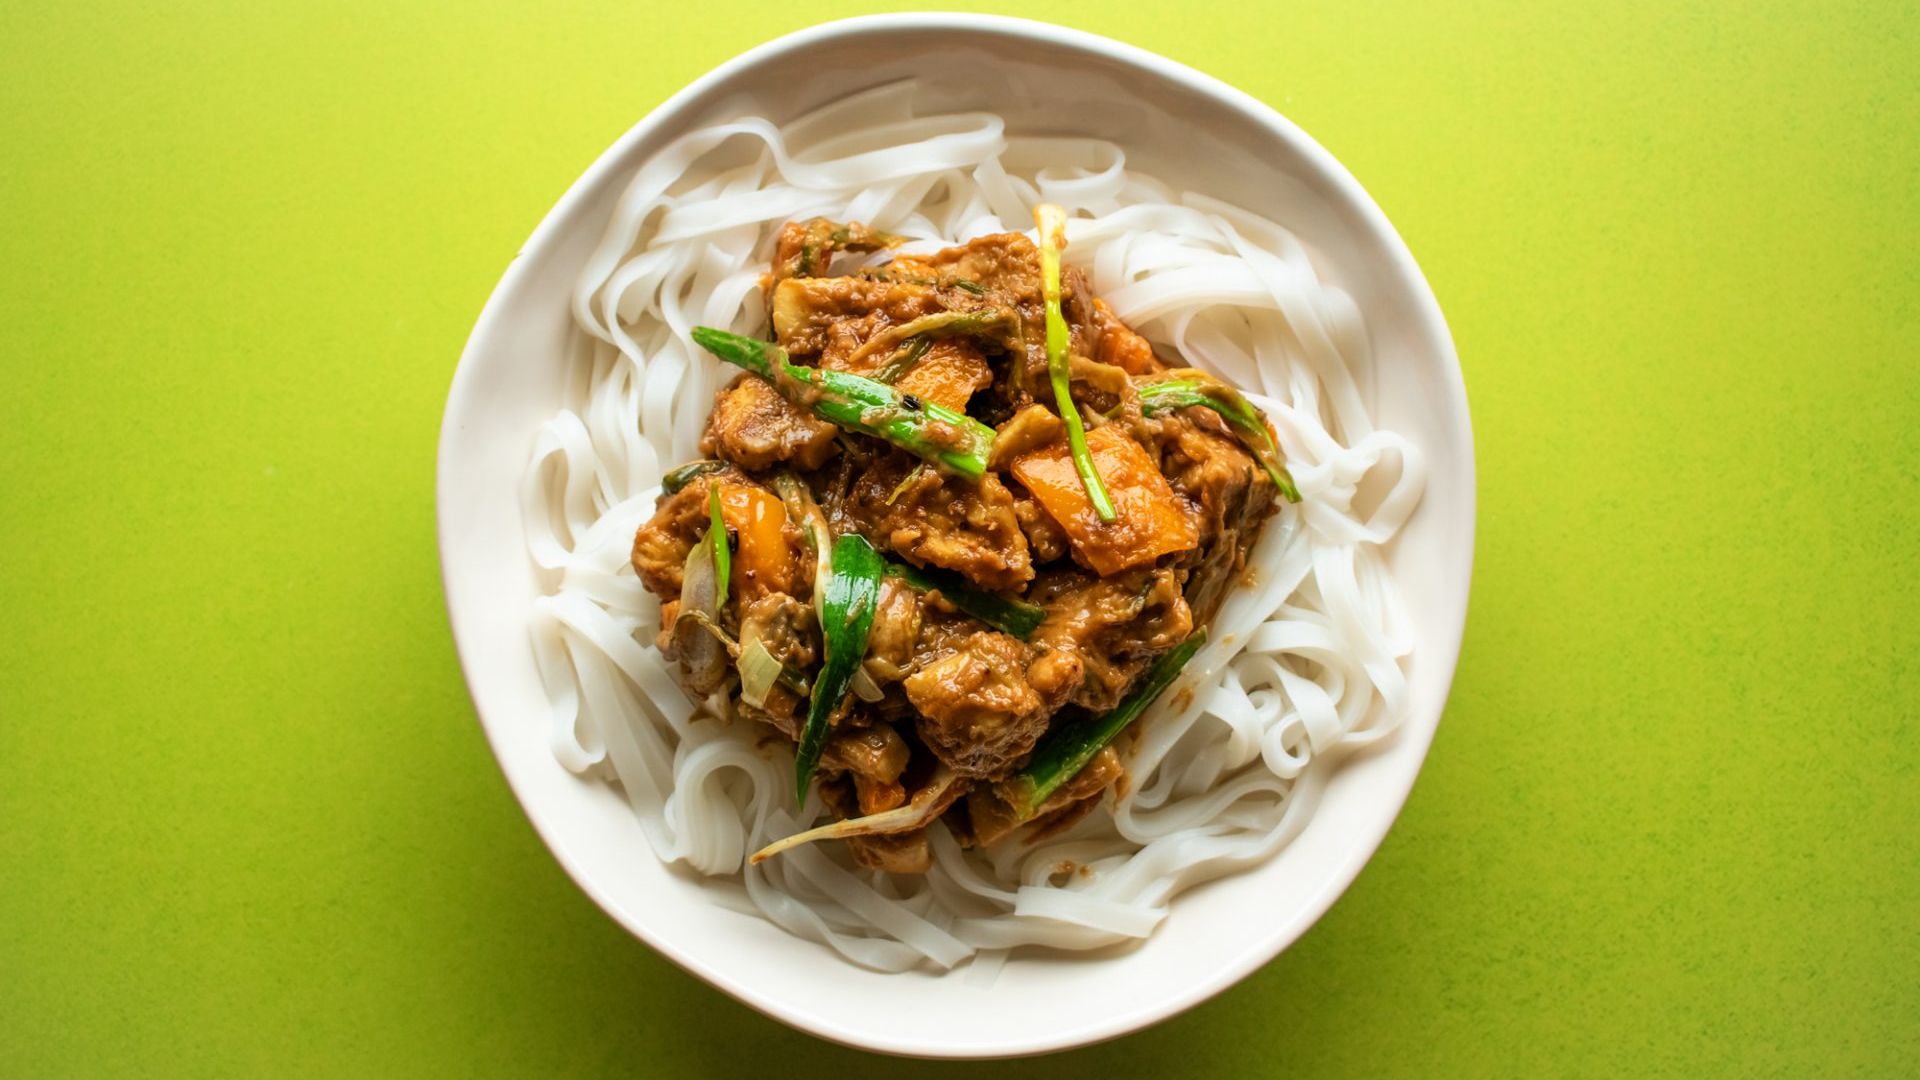 This recipe for sticky peanut butter tempeh stir-fry is packed with prebiotic gut goodness